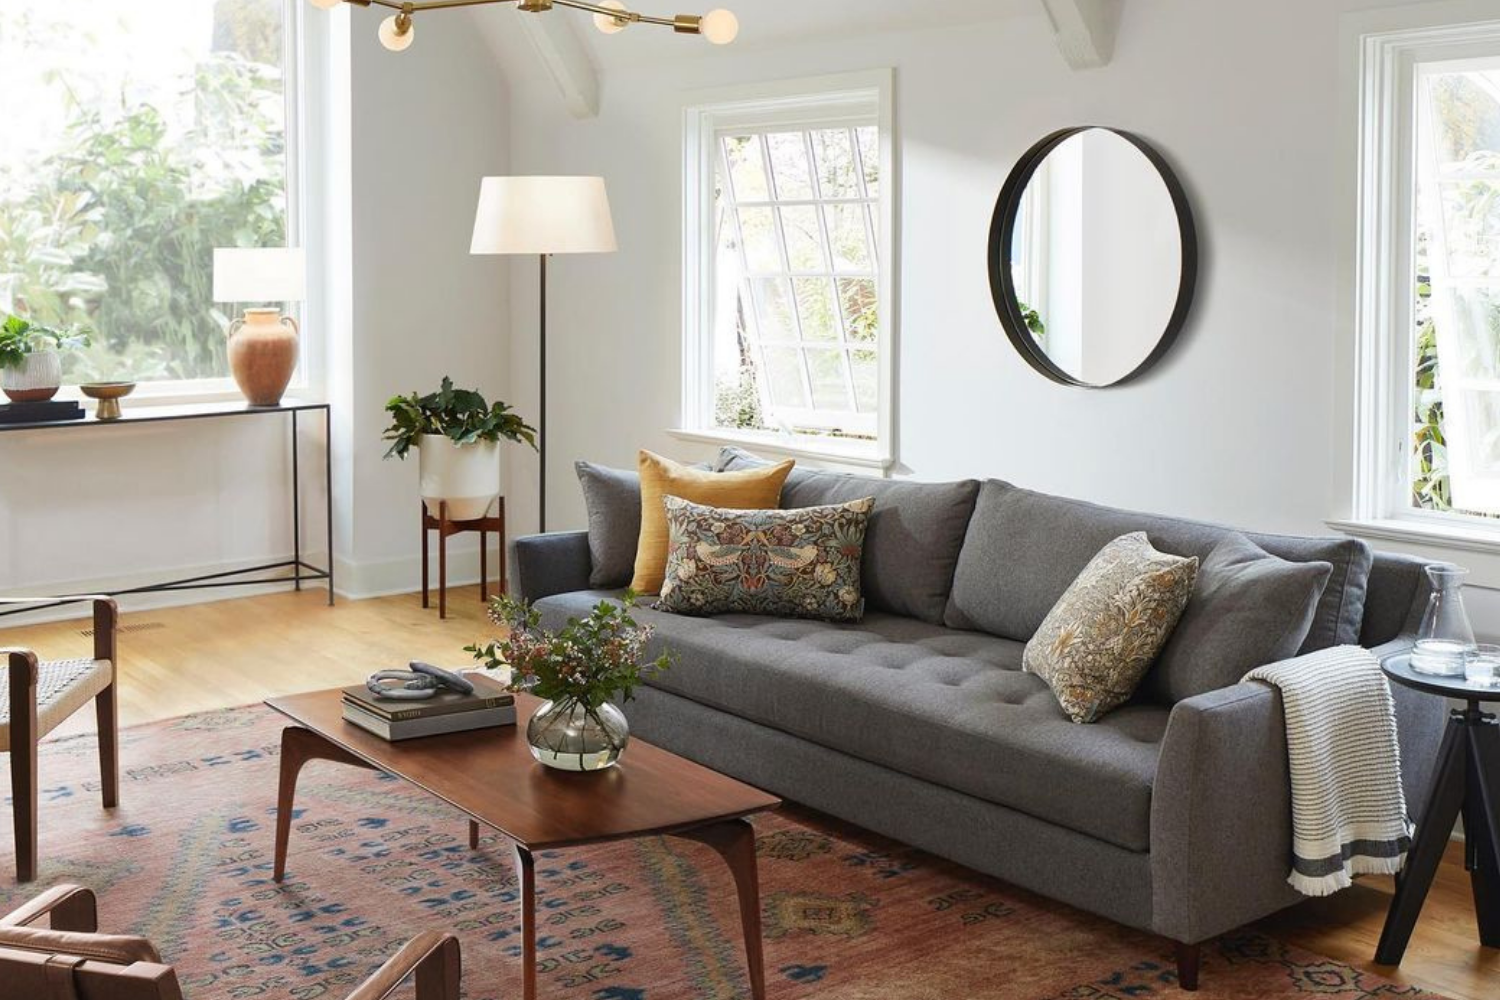 Mirrors& Sofas: A Surprising Timeless Combo